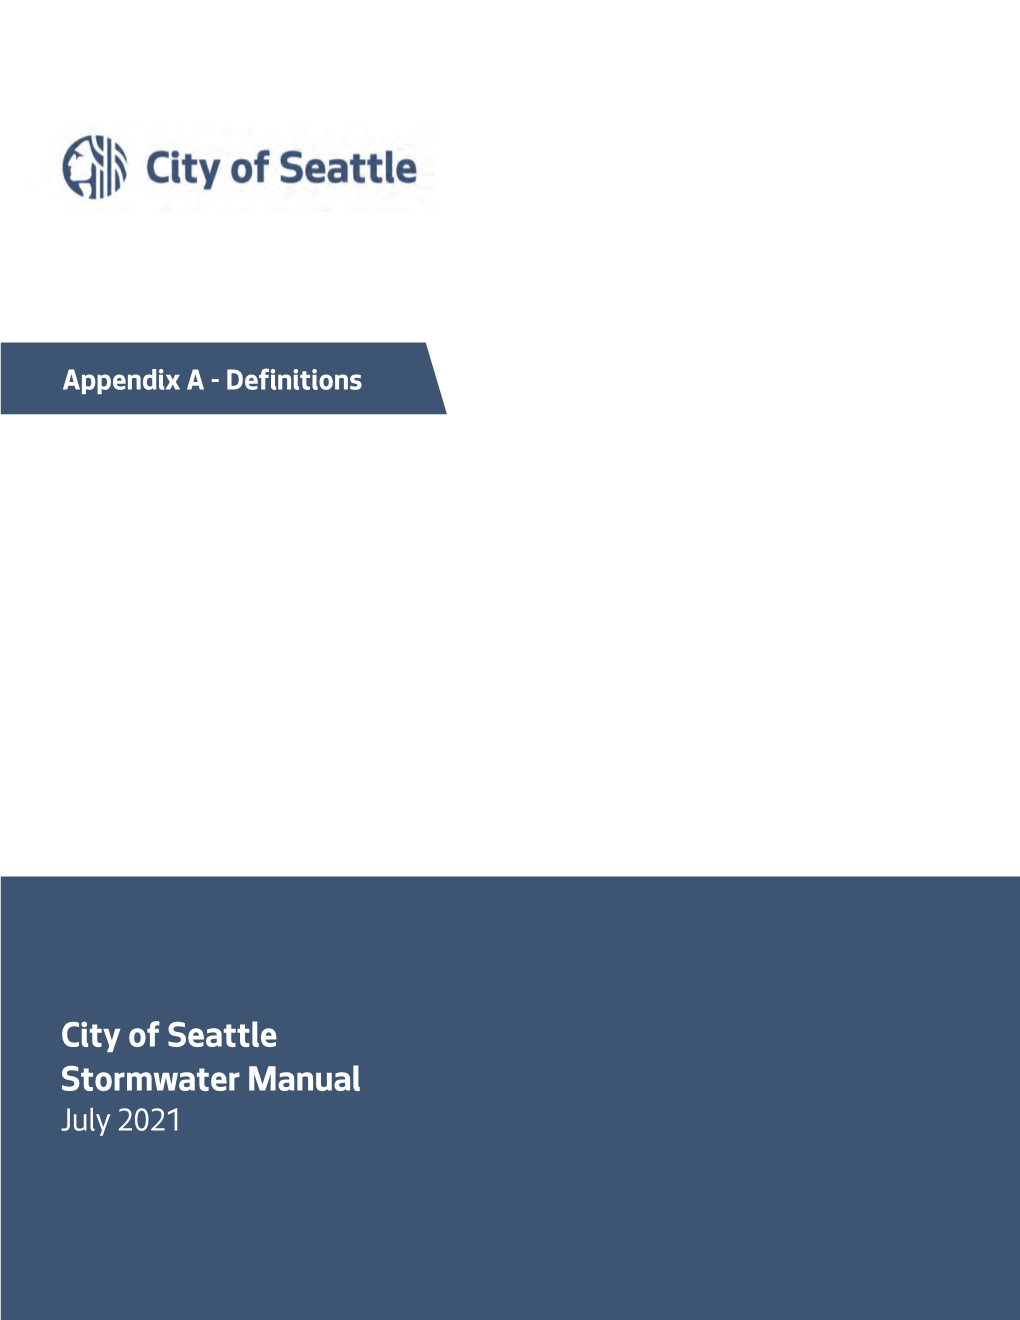 City of Seattle Stormwater Manual